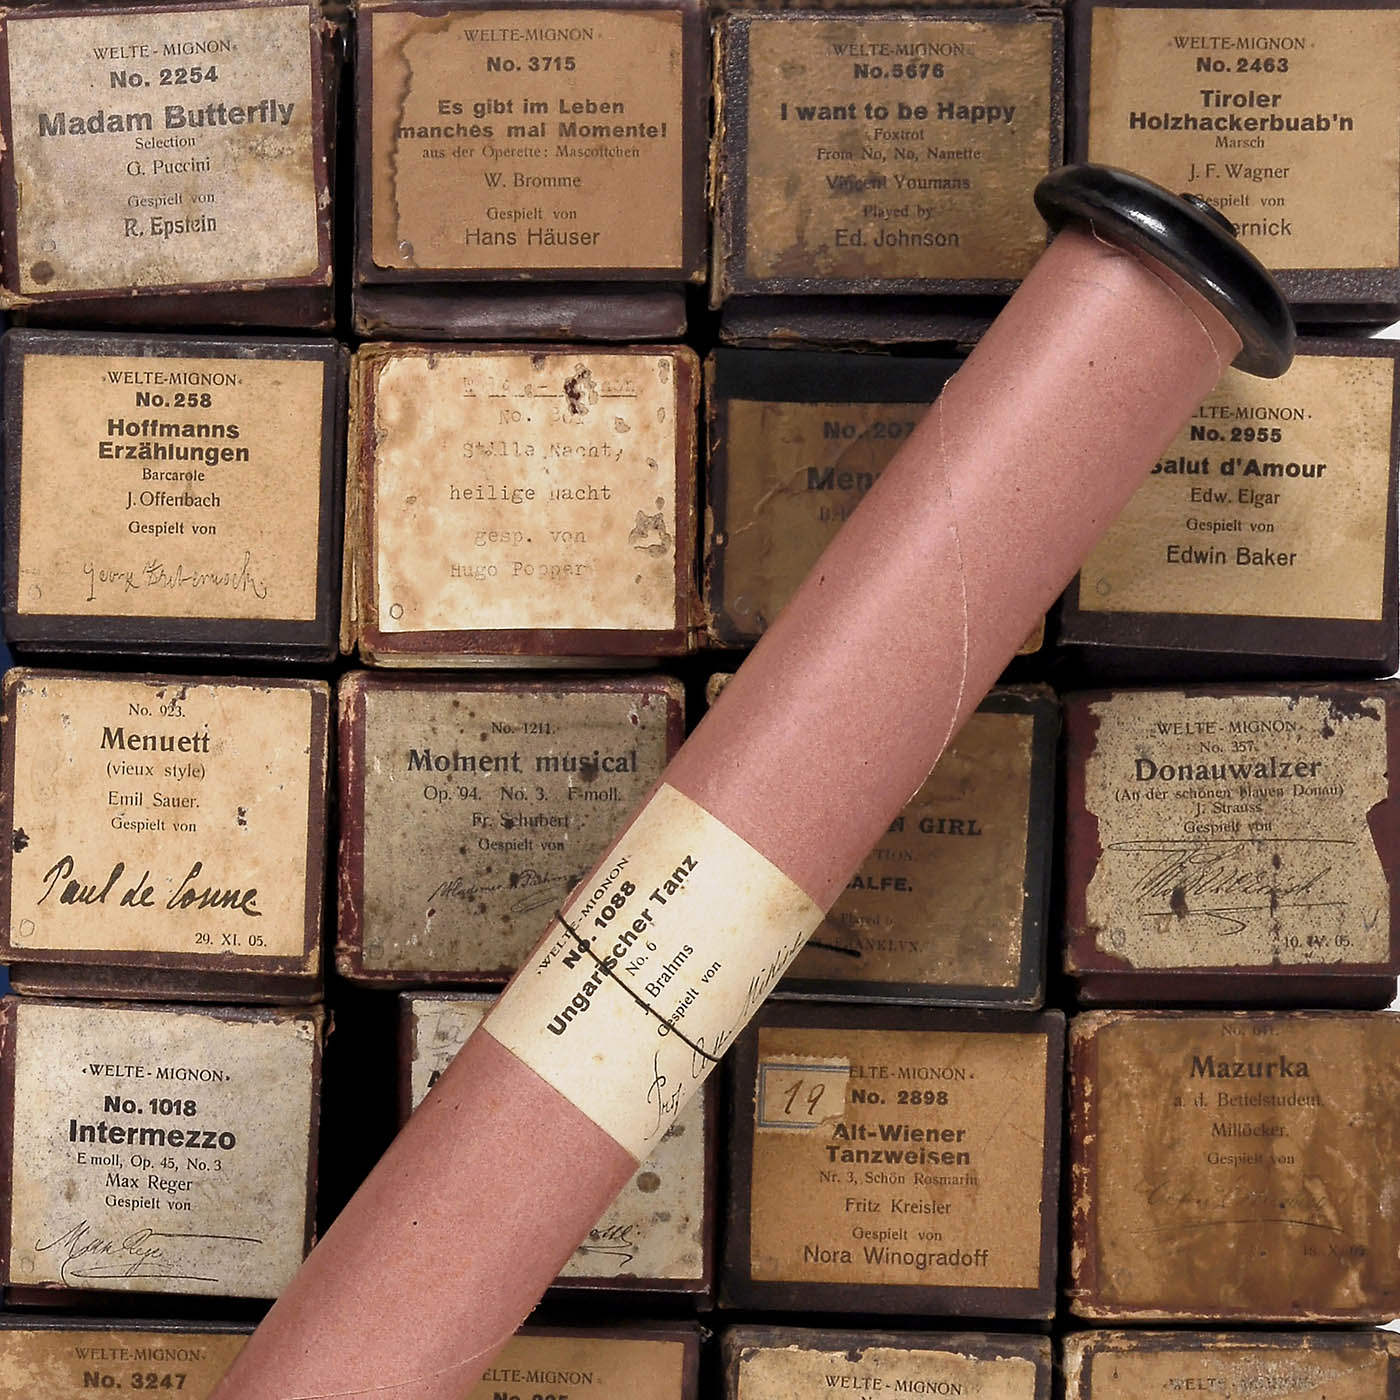 54 Welte-Mignon Reproducing Piano Rolls (T 100 -Red), 1905 onwards - Image 5 of 8